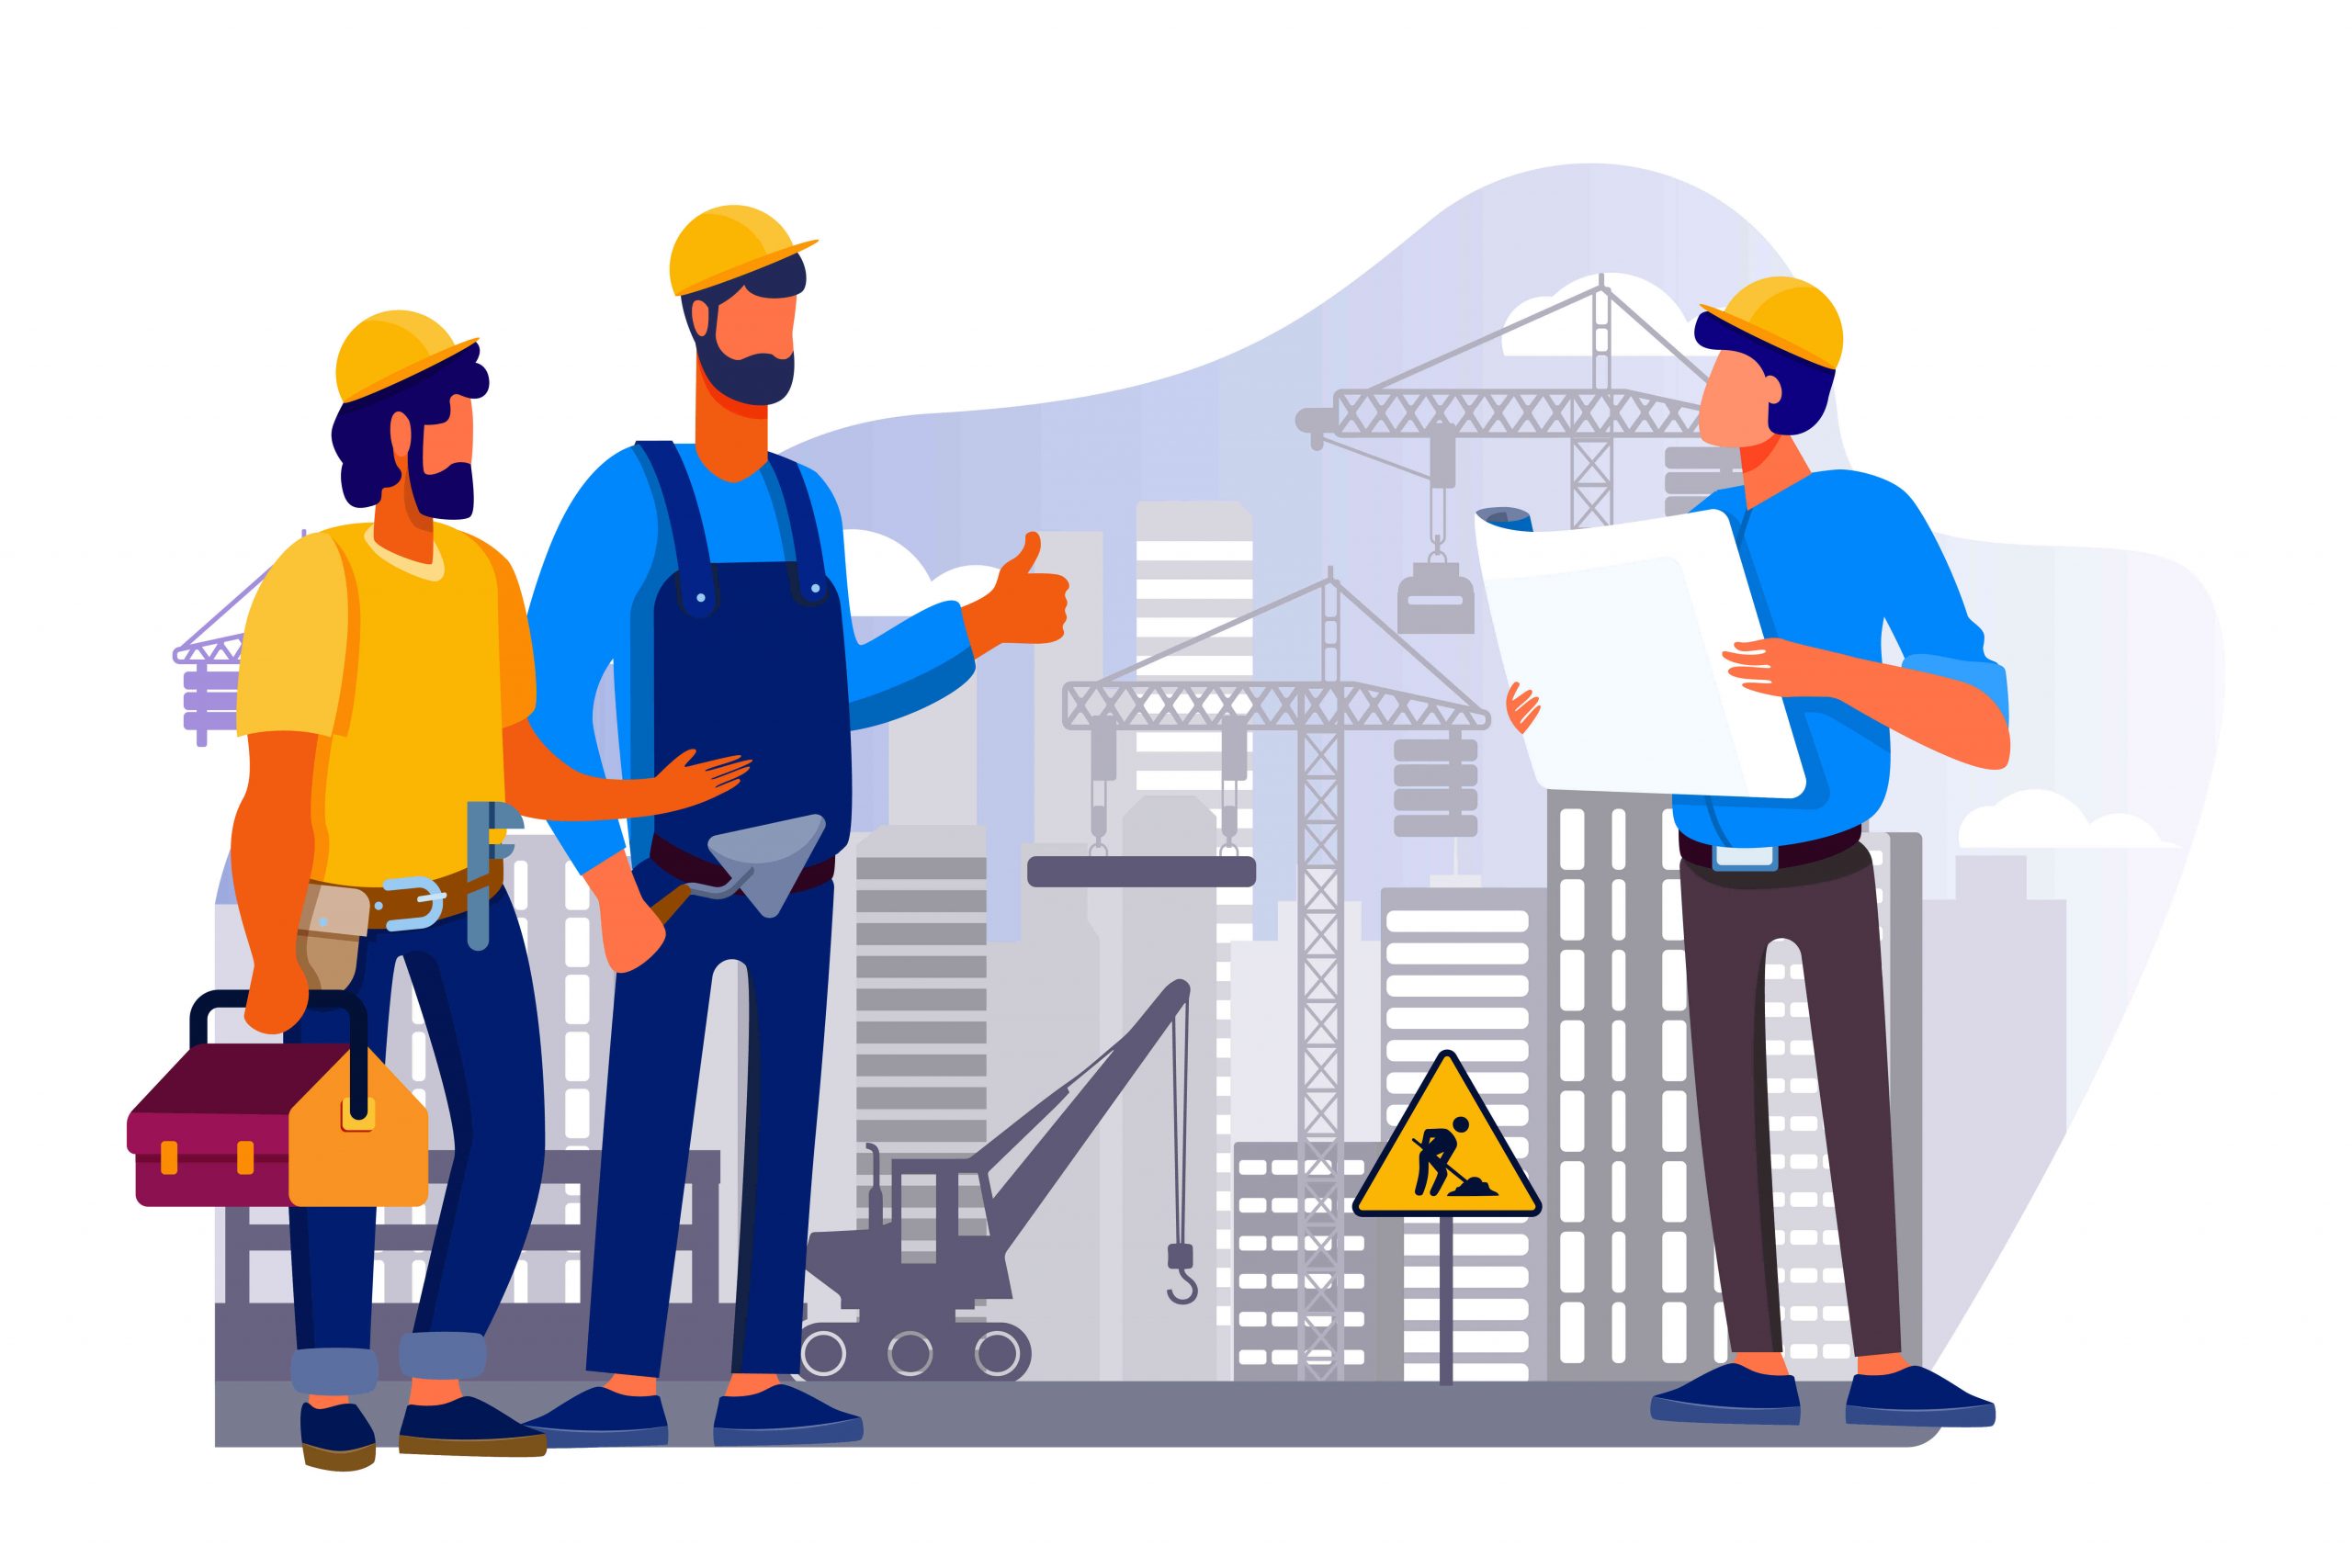 CONTRACTOR'S ALL RISKS INSURANCE - vector image of contractor and labours